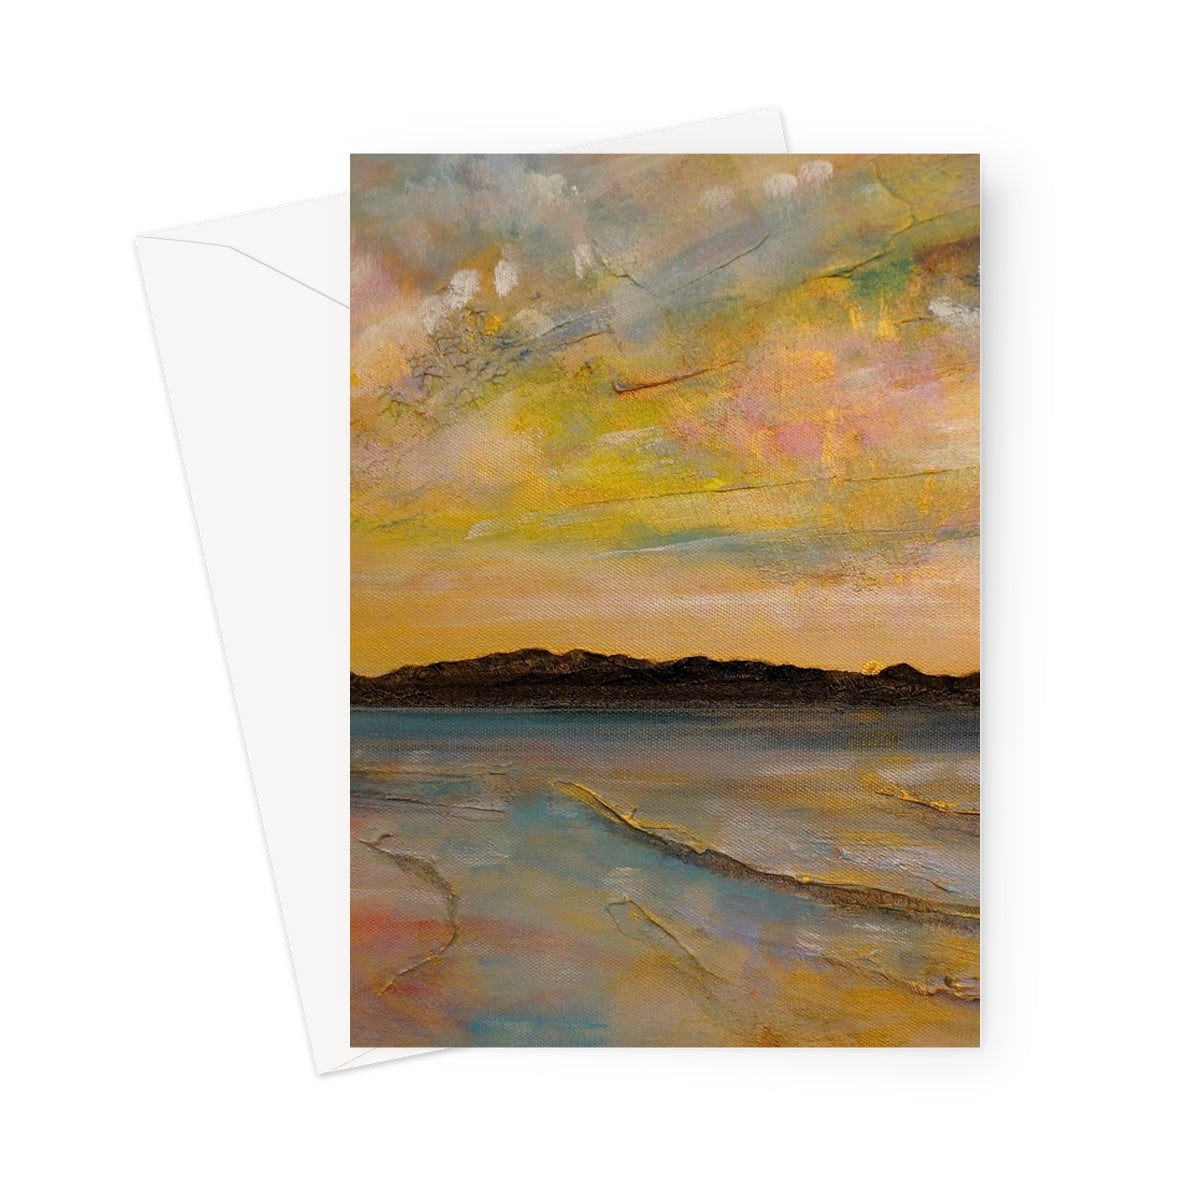 Vallay Island North Uist Art Gifts Greeting Card-Greetings Cards-Hebridean Islands Art Gallery-5"x7"-1 Card-Paintings, Prints, Homeware, Art Gifts From Scotland By Scottish Artist Kevin Hunter